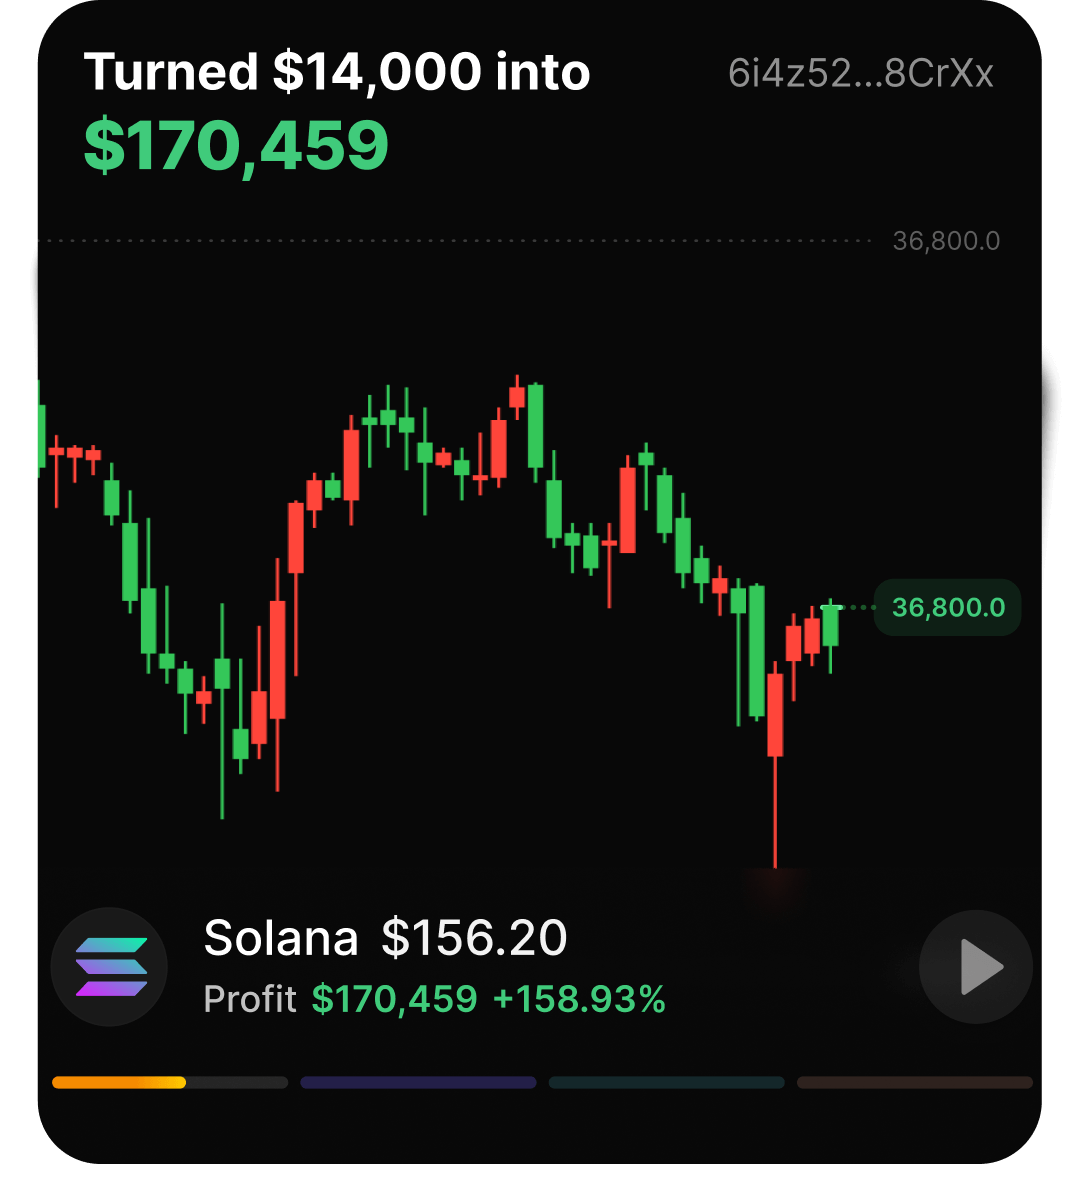 Tokie UI with a candlestick chart displaying the a profitable trade on the Solana blockchain